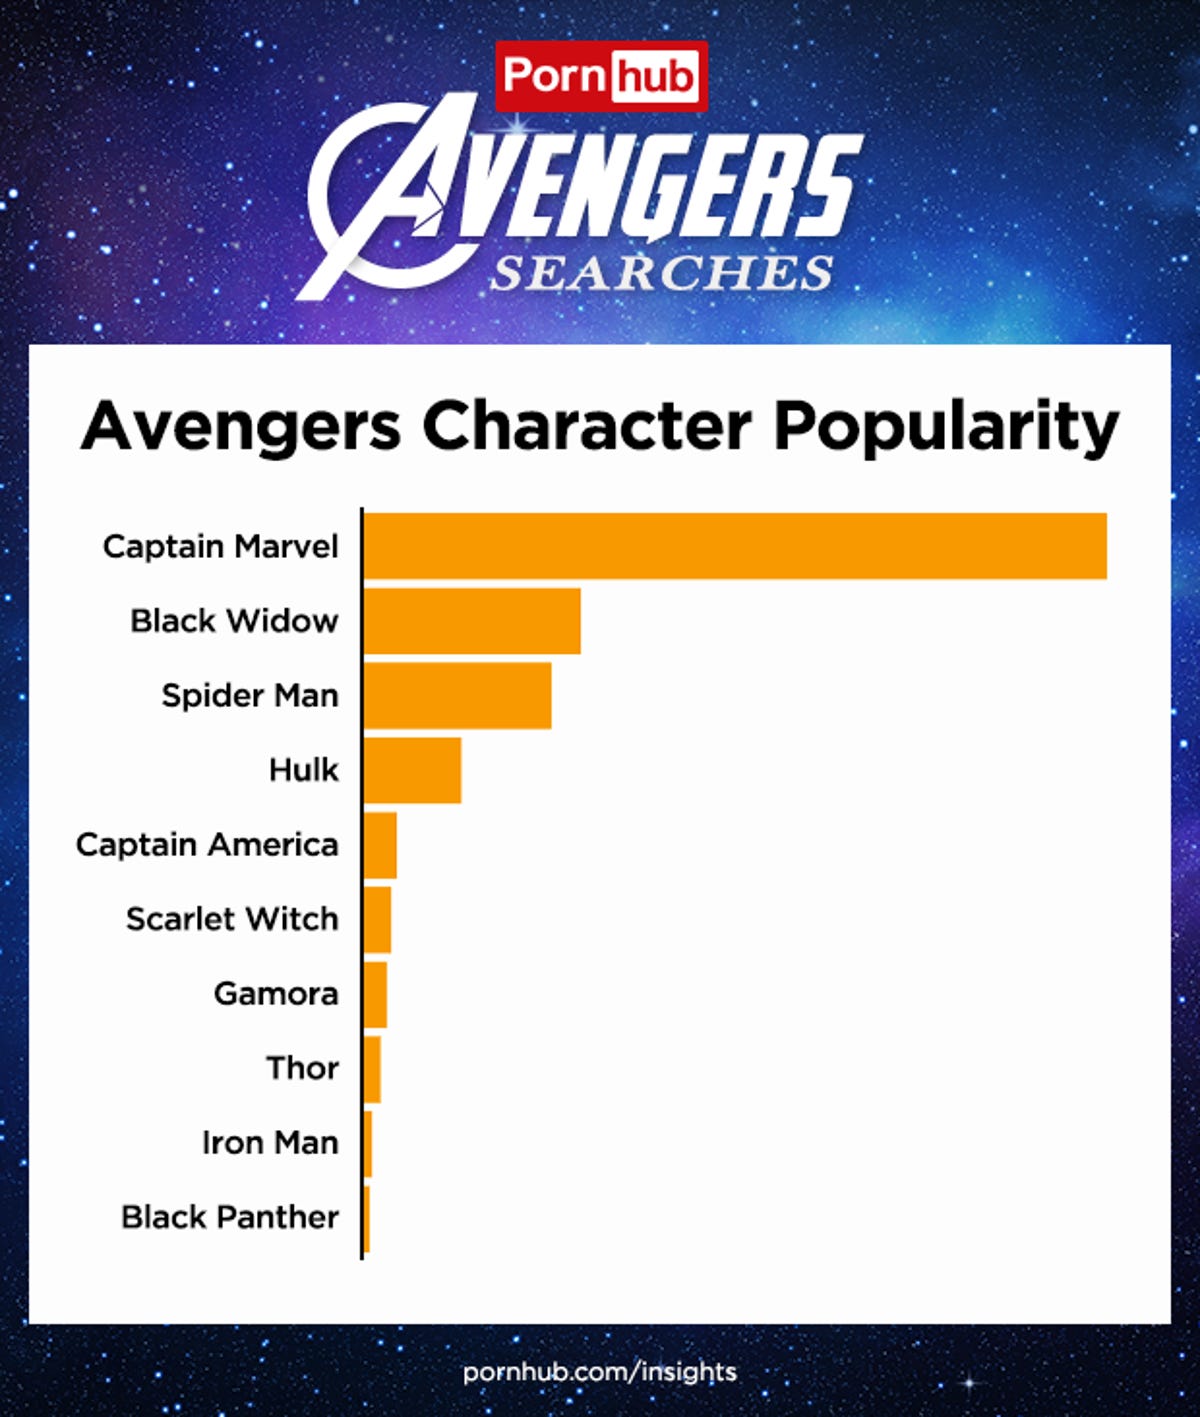 pornhub-insights-avengers-2019-character-search-popularity